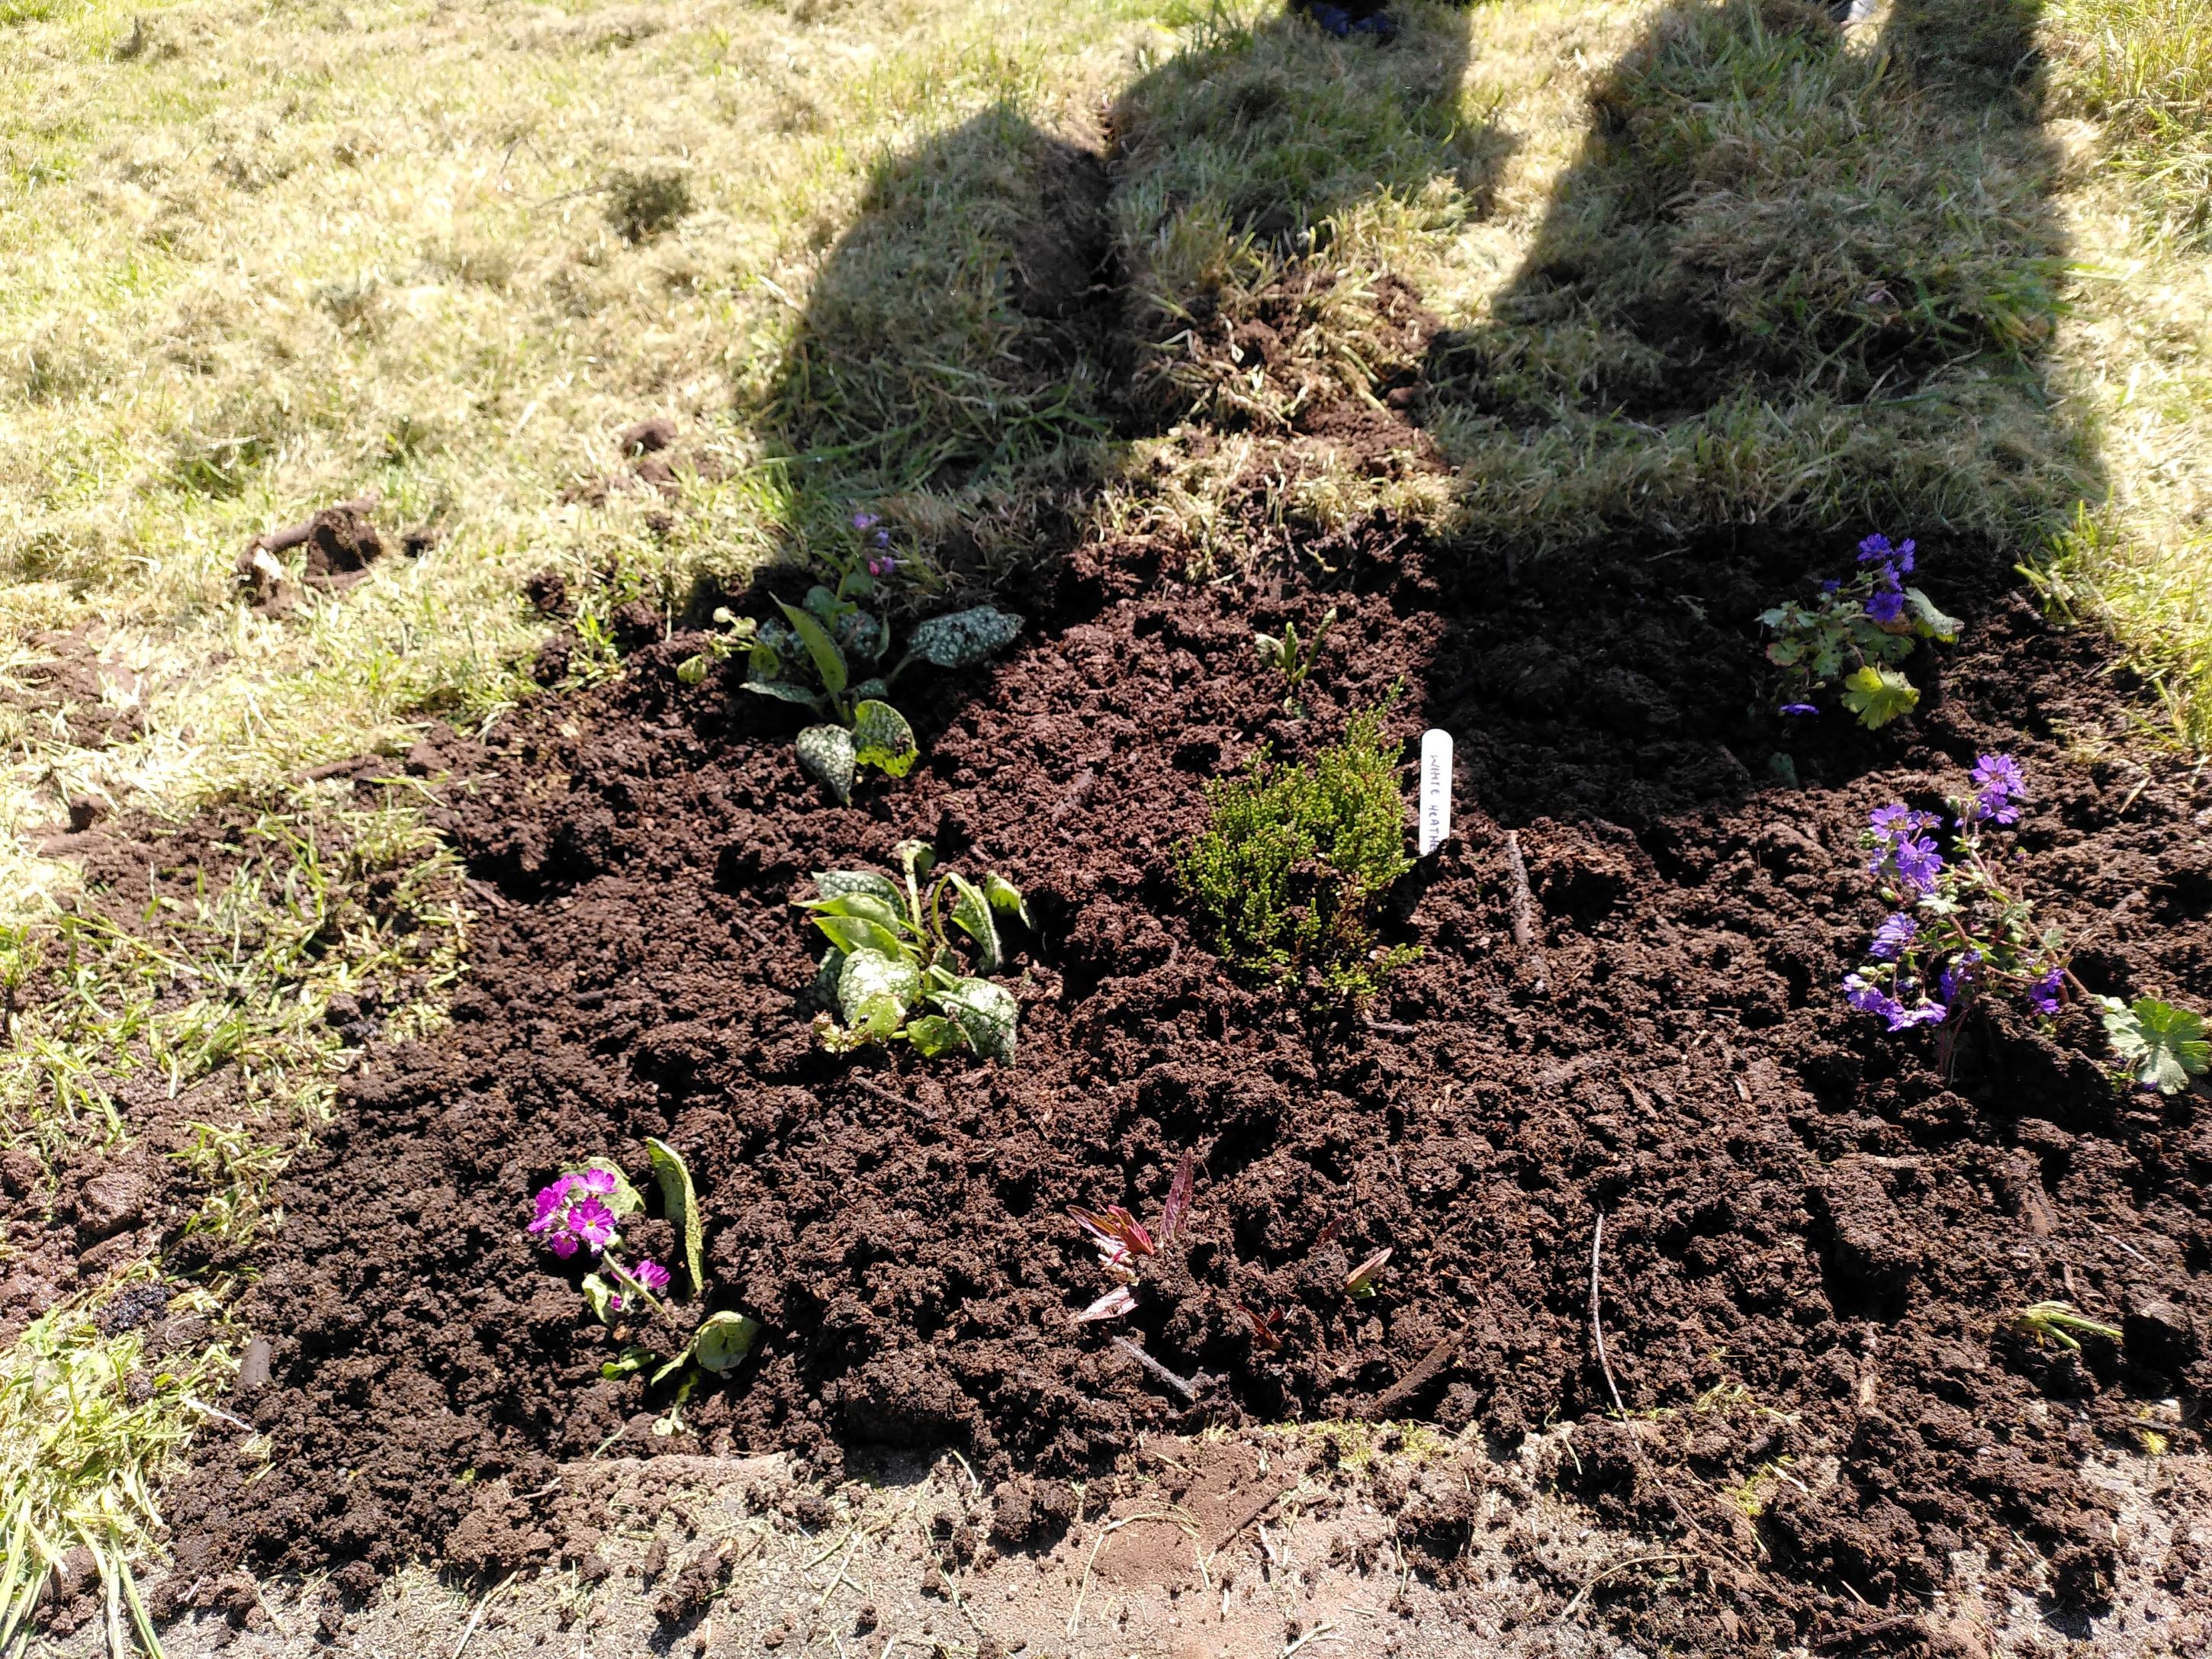 First plants in the soil